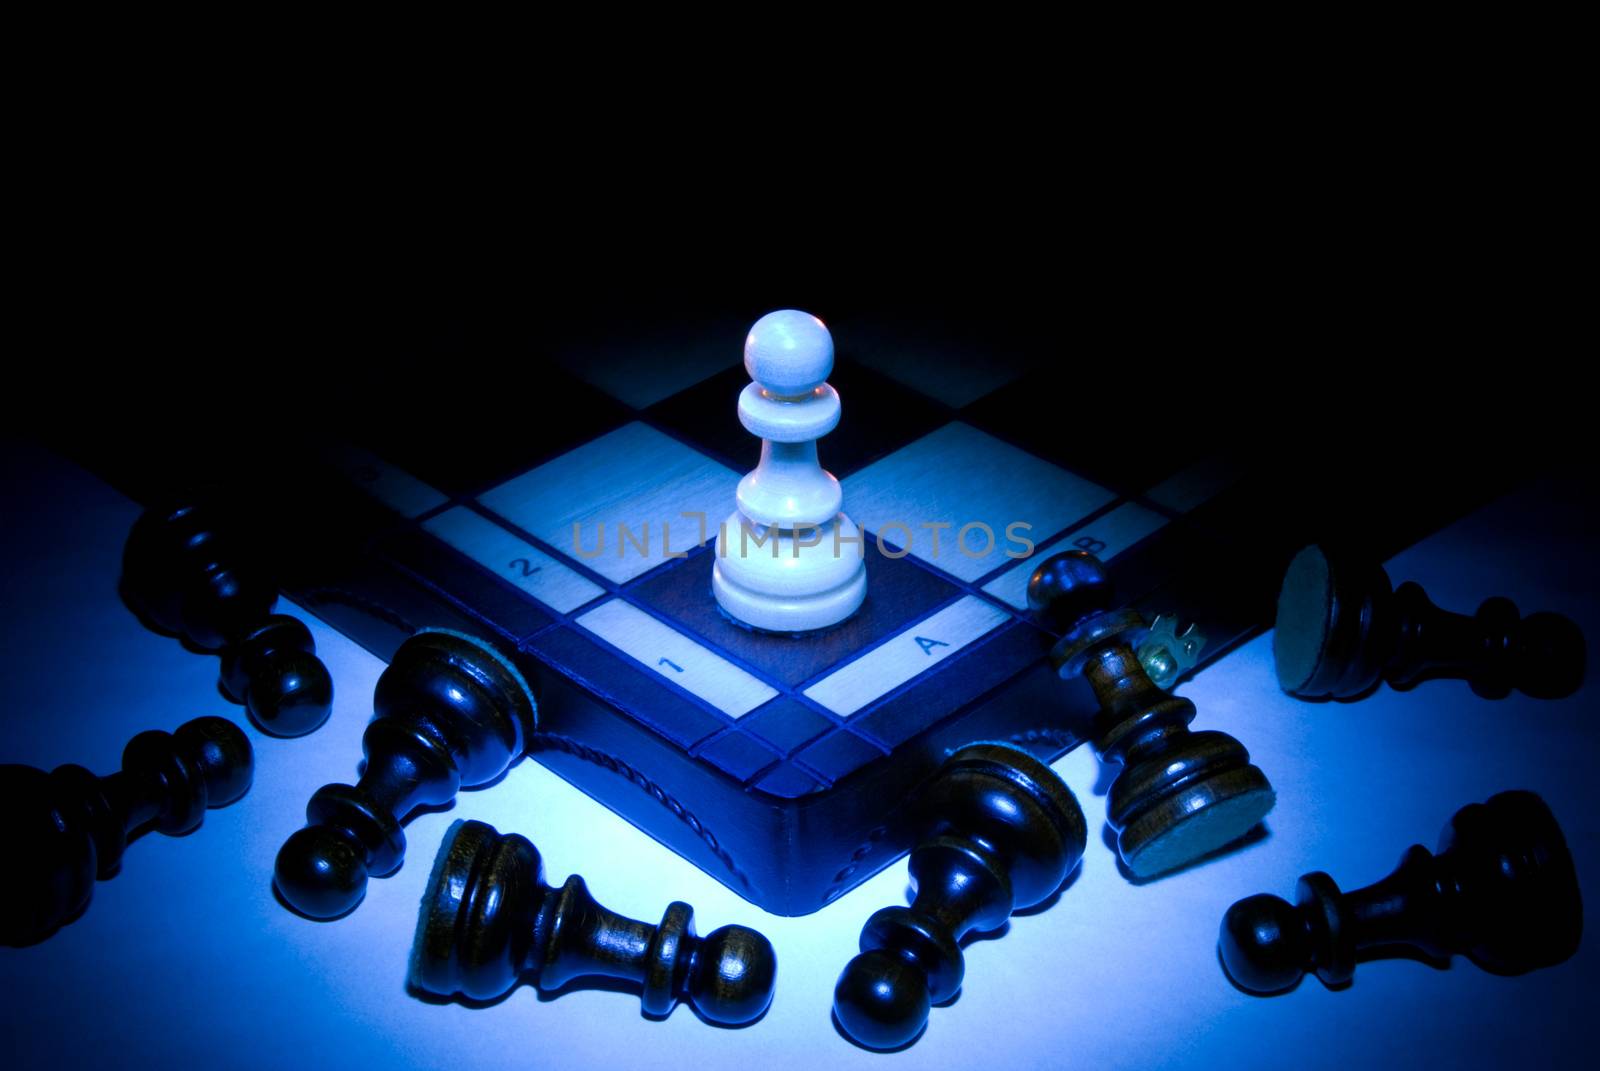 Chess board and pawns. A dark blue art background.